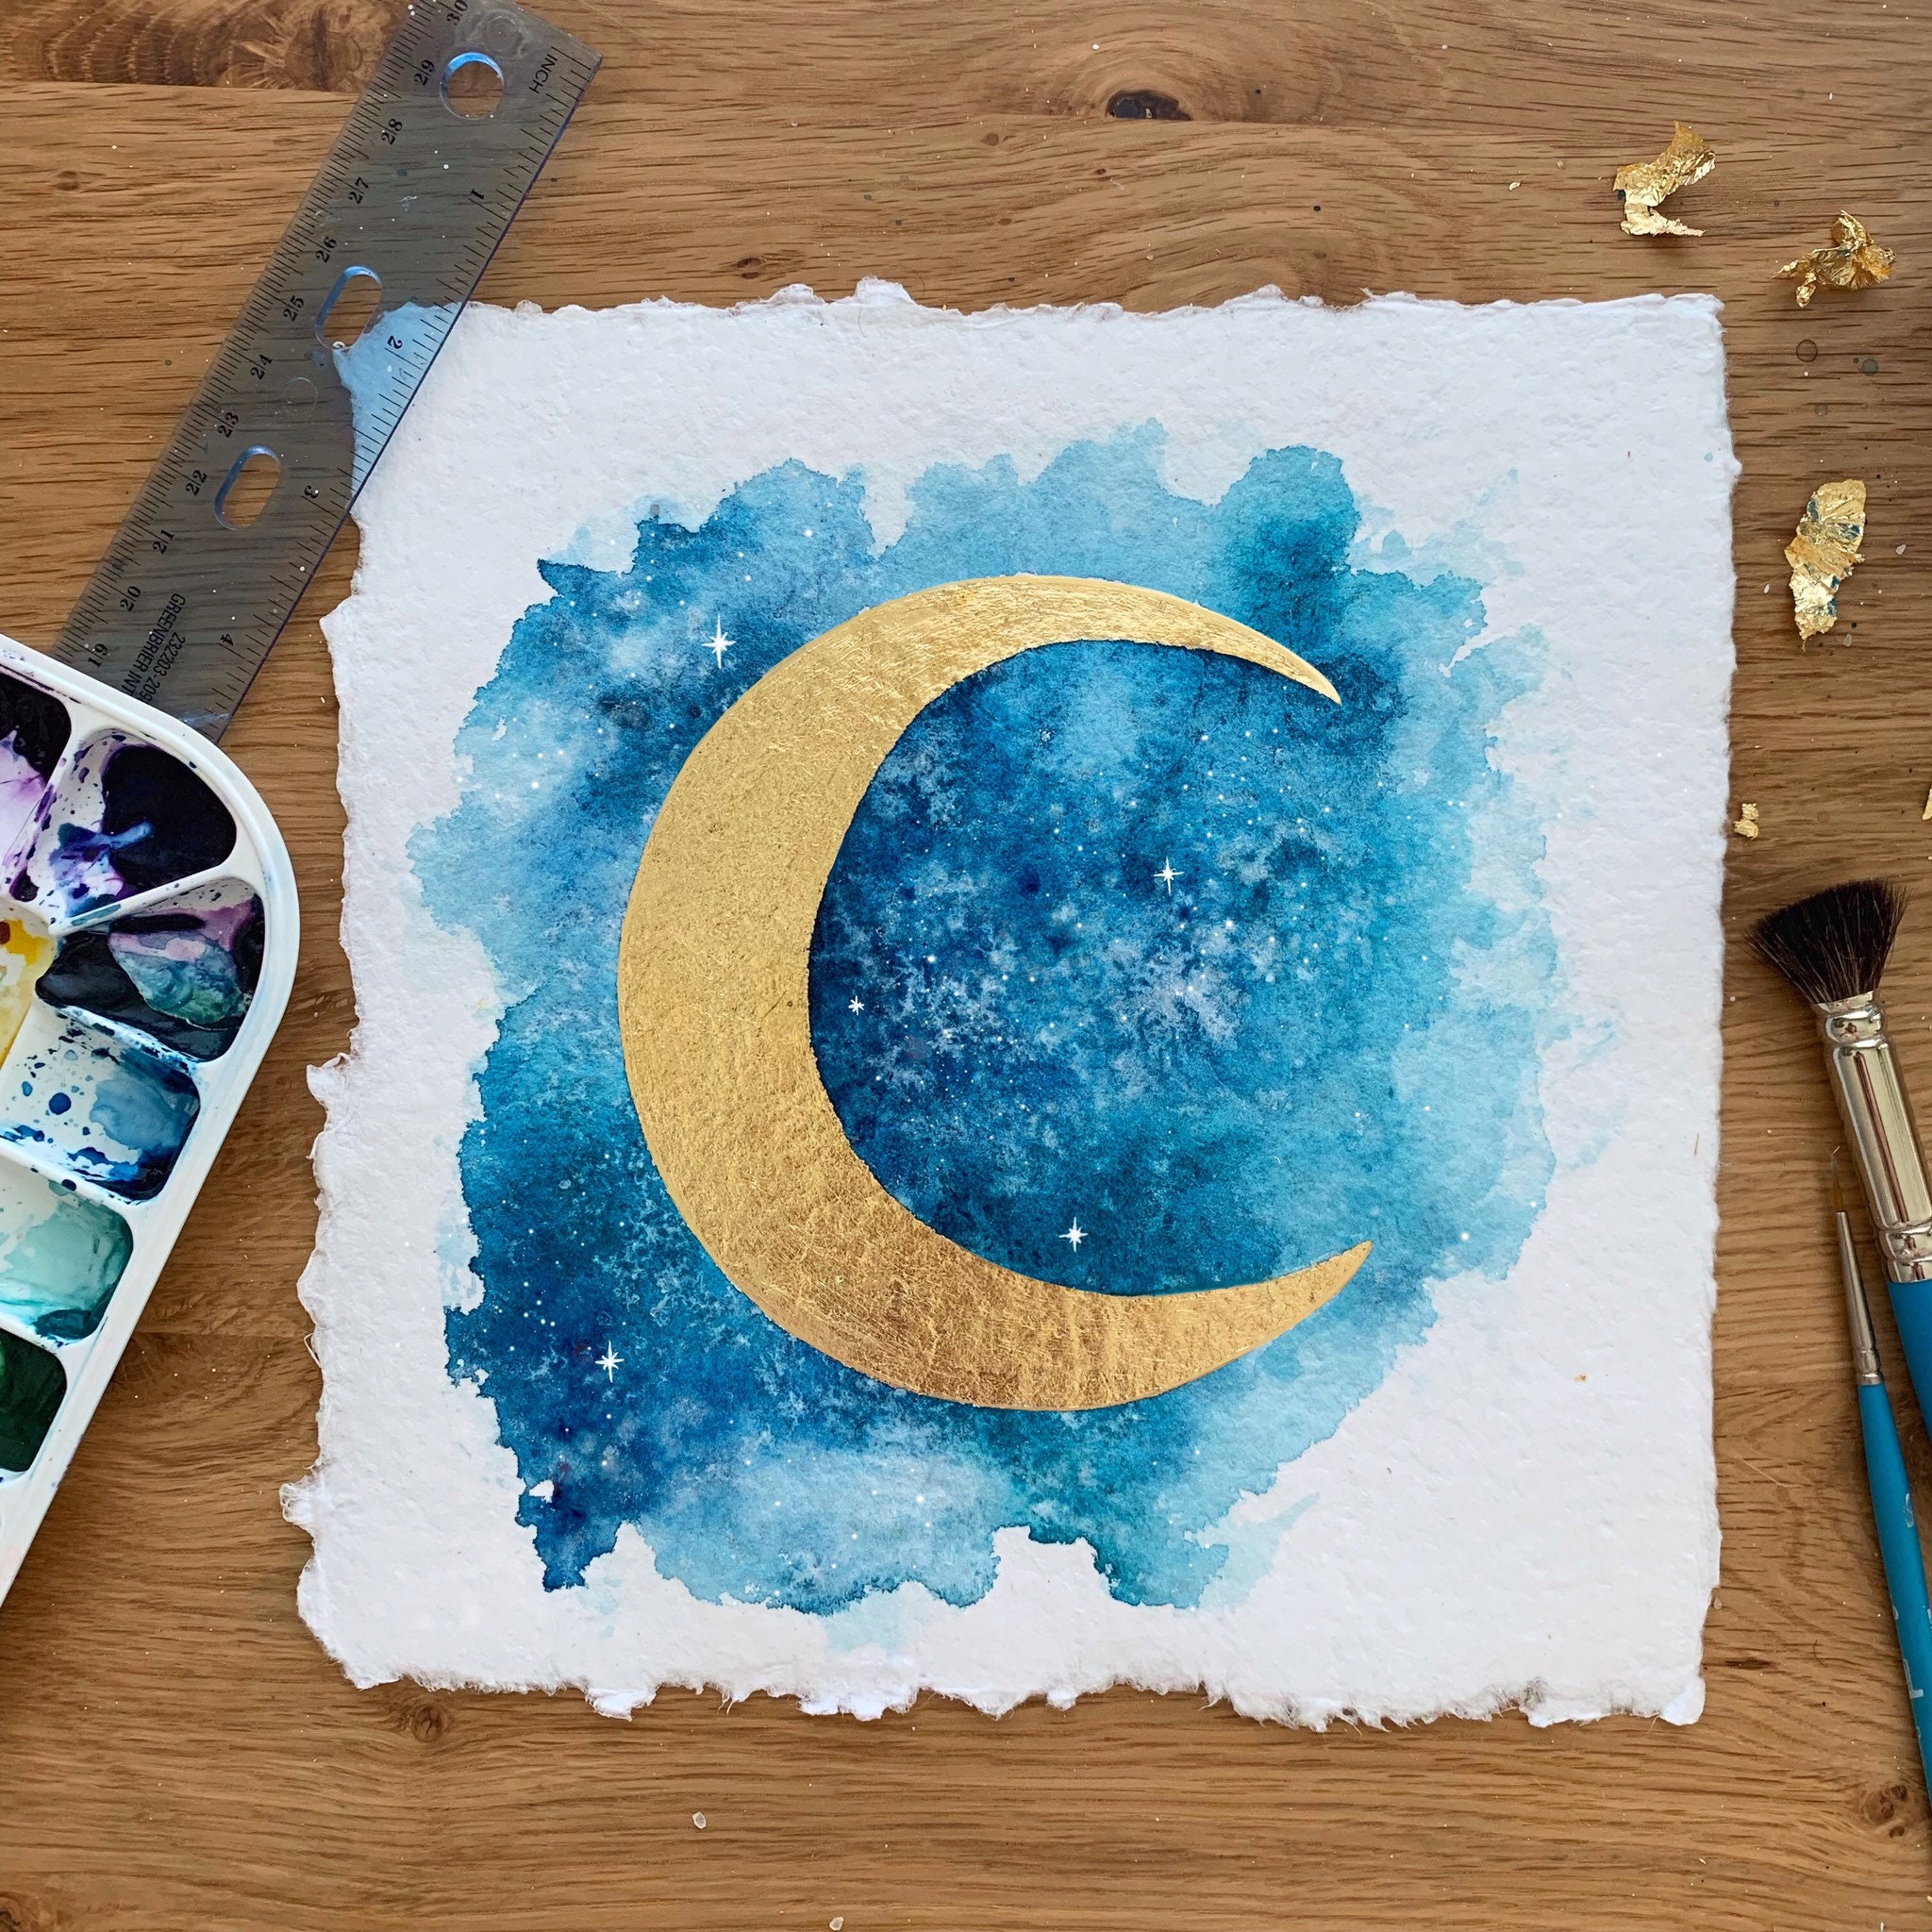 Watercolor Tutorial: Moon Phases Illustration